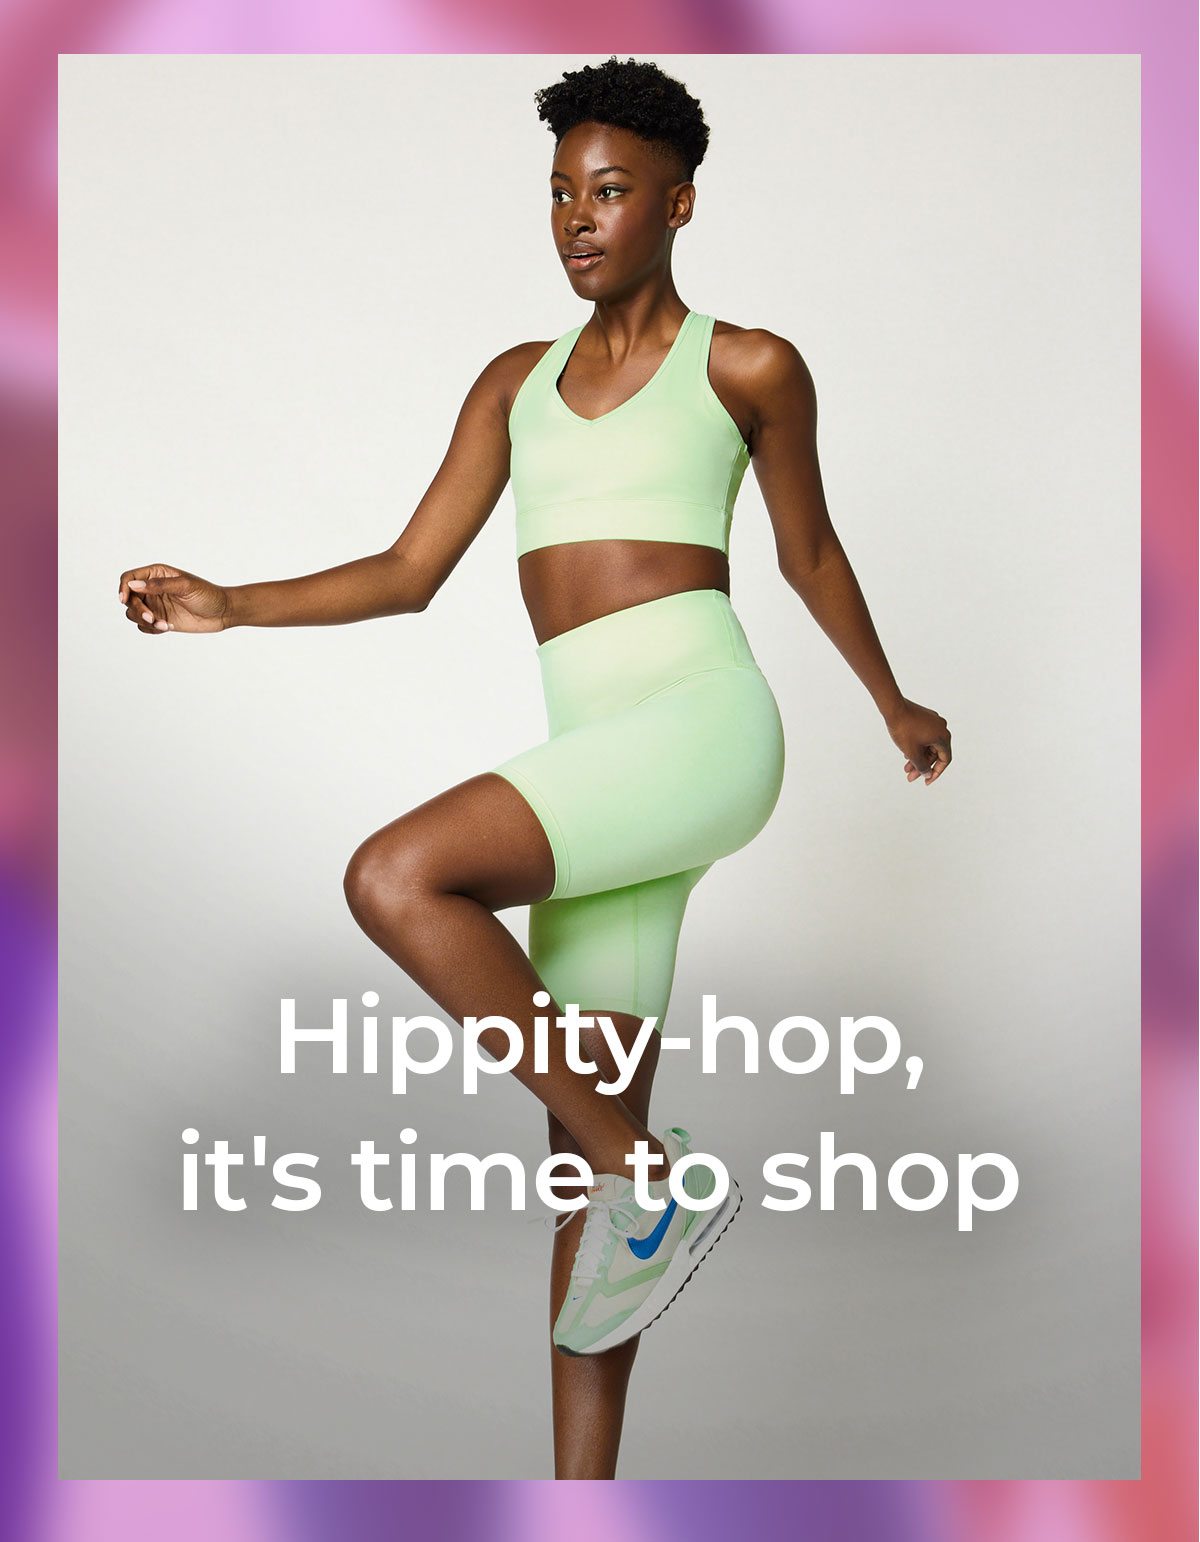 Hippty-hop, it's time to shop